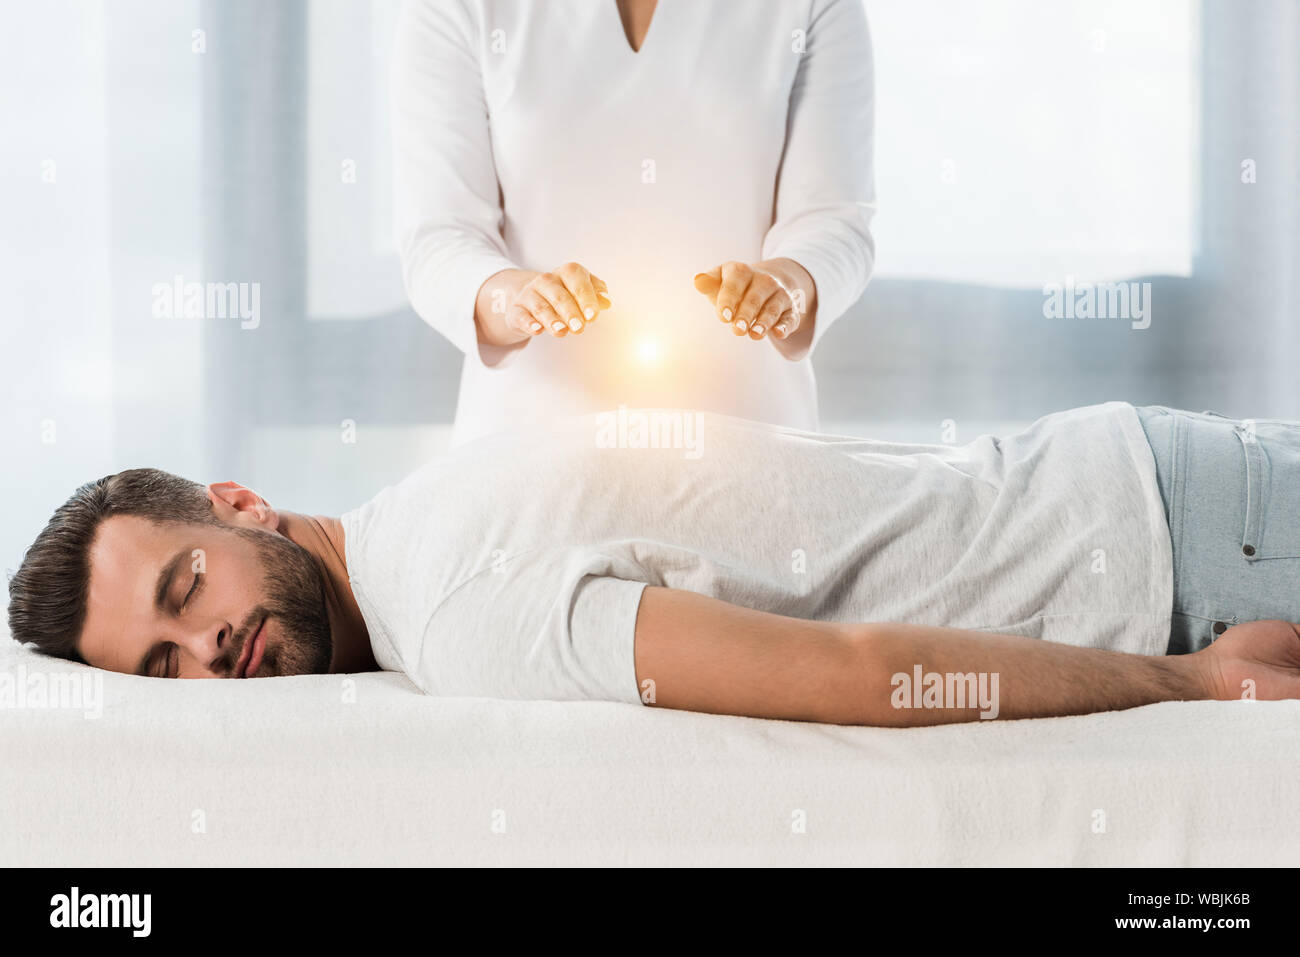 cropped view of woman healing man while putting hands above body Stock Photo